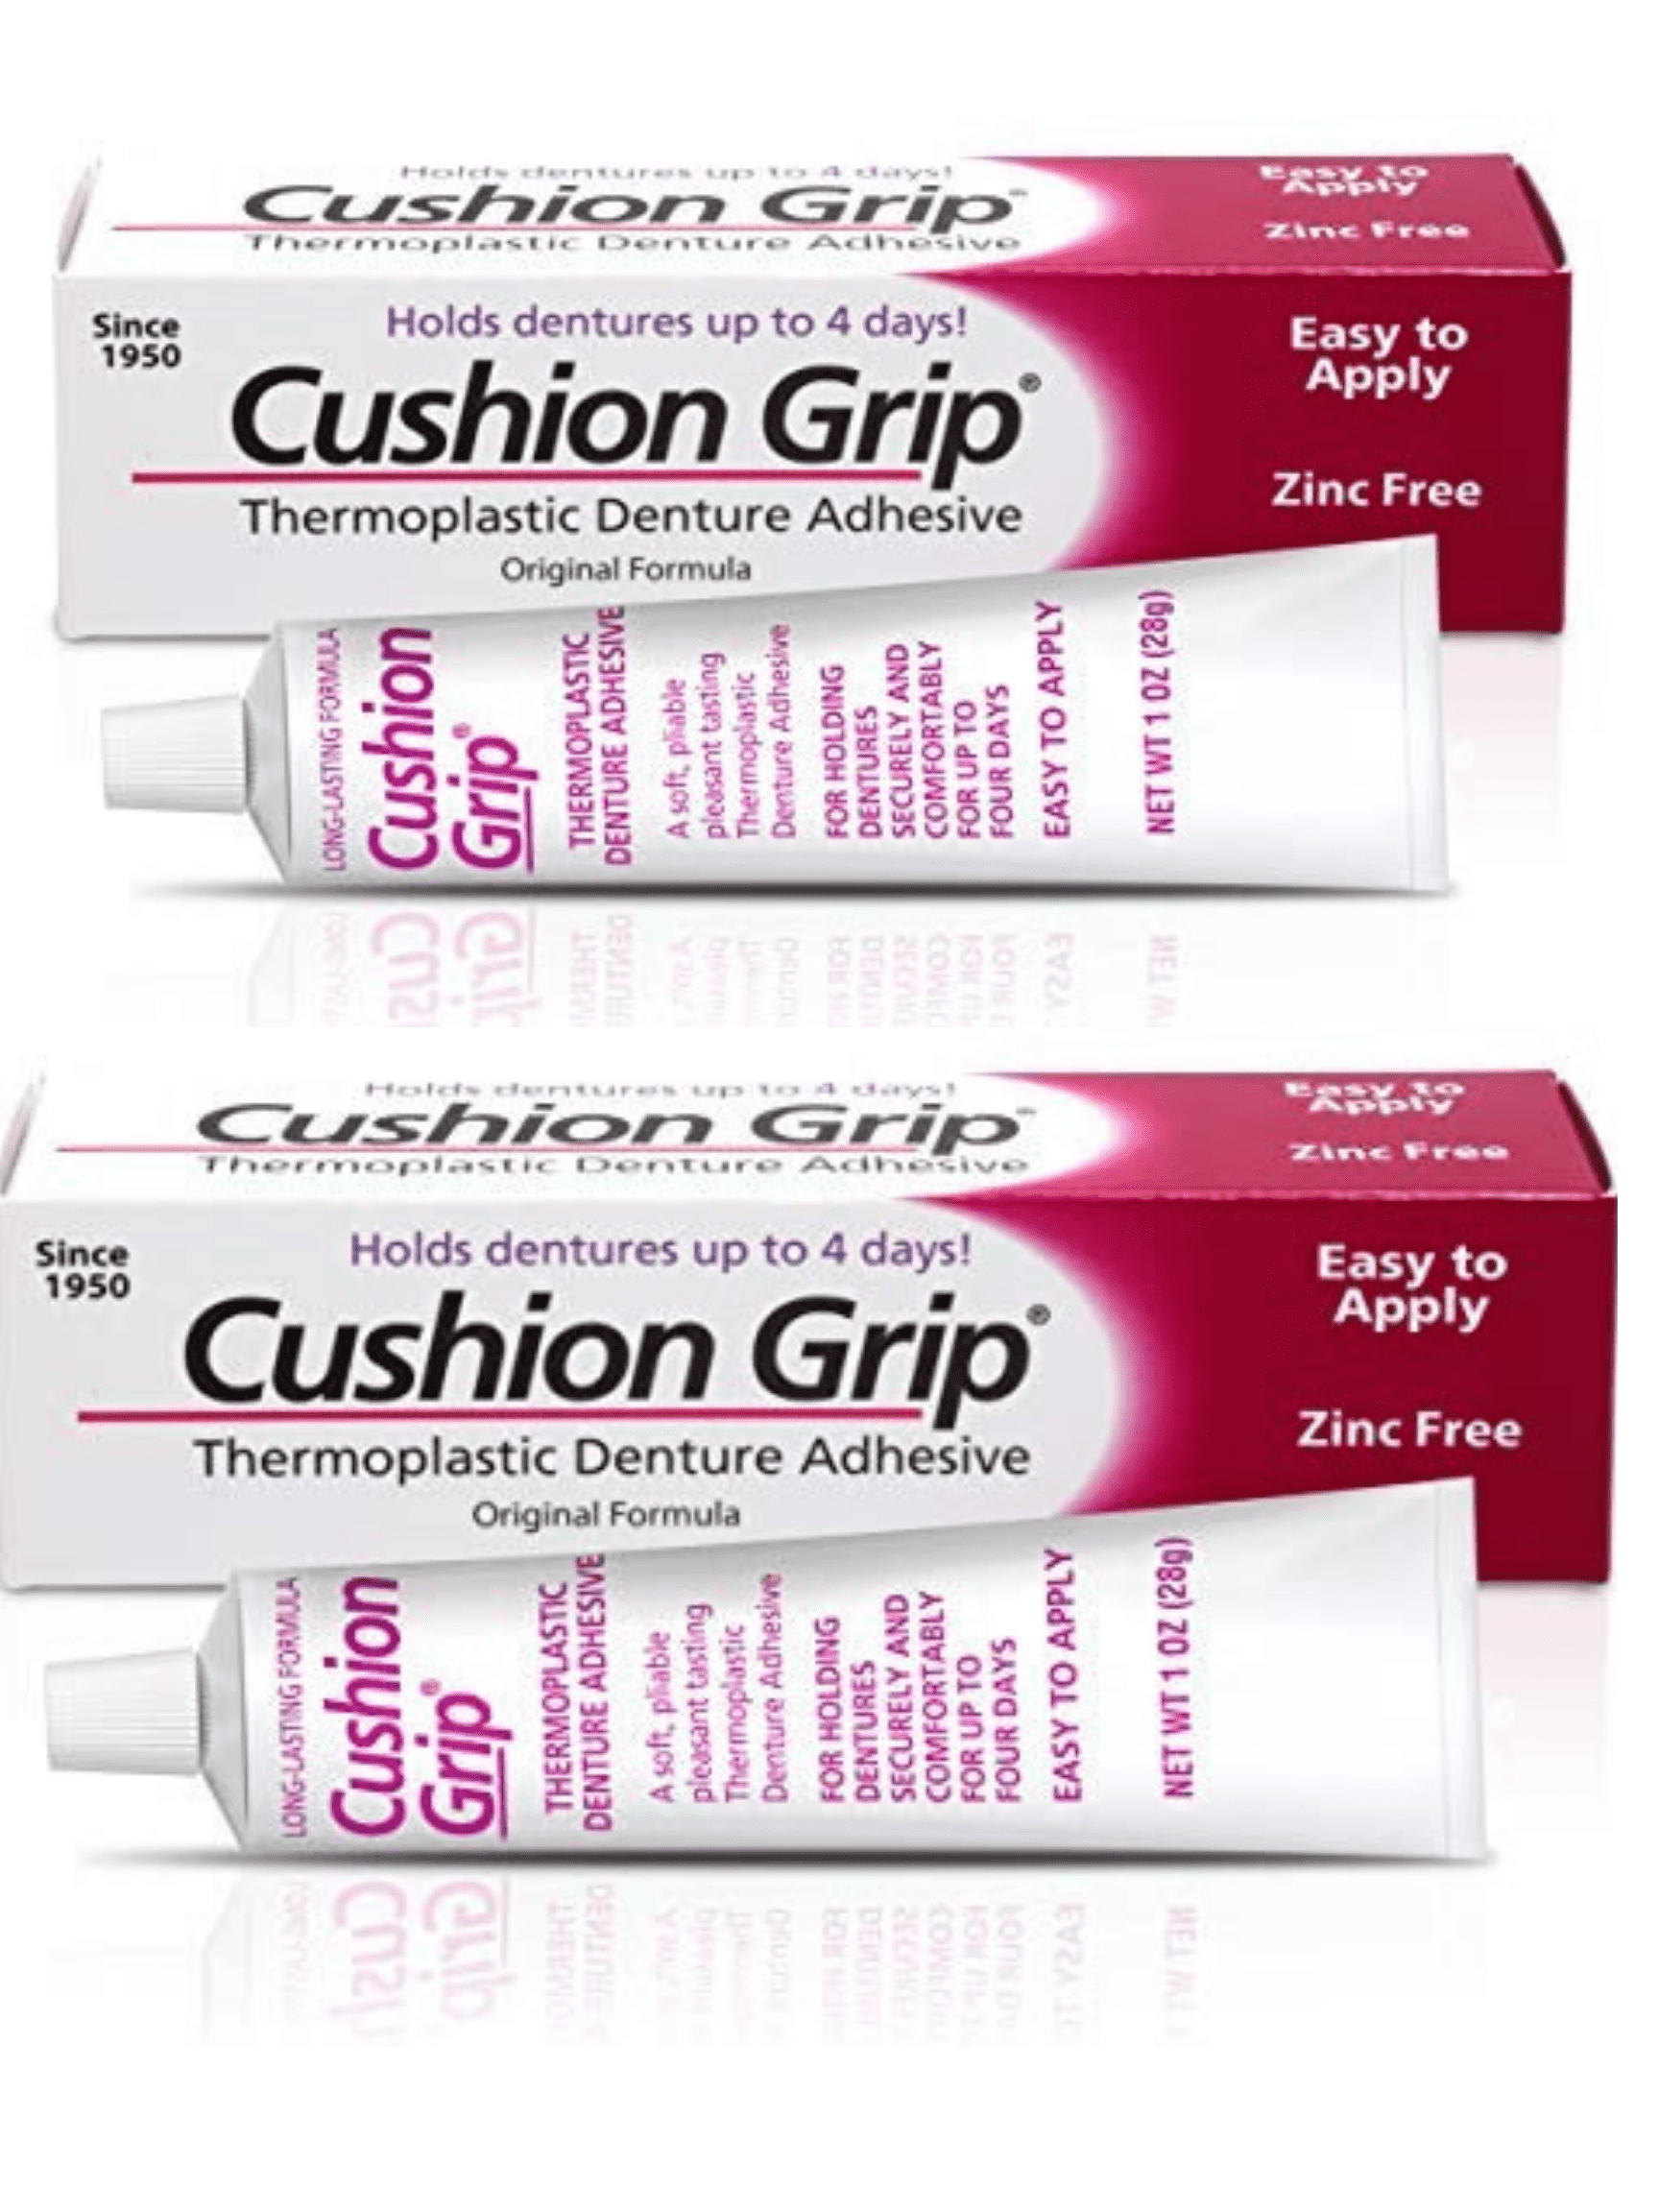 Save a Lot! A Full Year's Supply of Cushion Grip Kind of Deal! – My Cushion  Grip